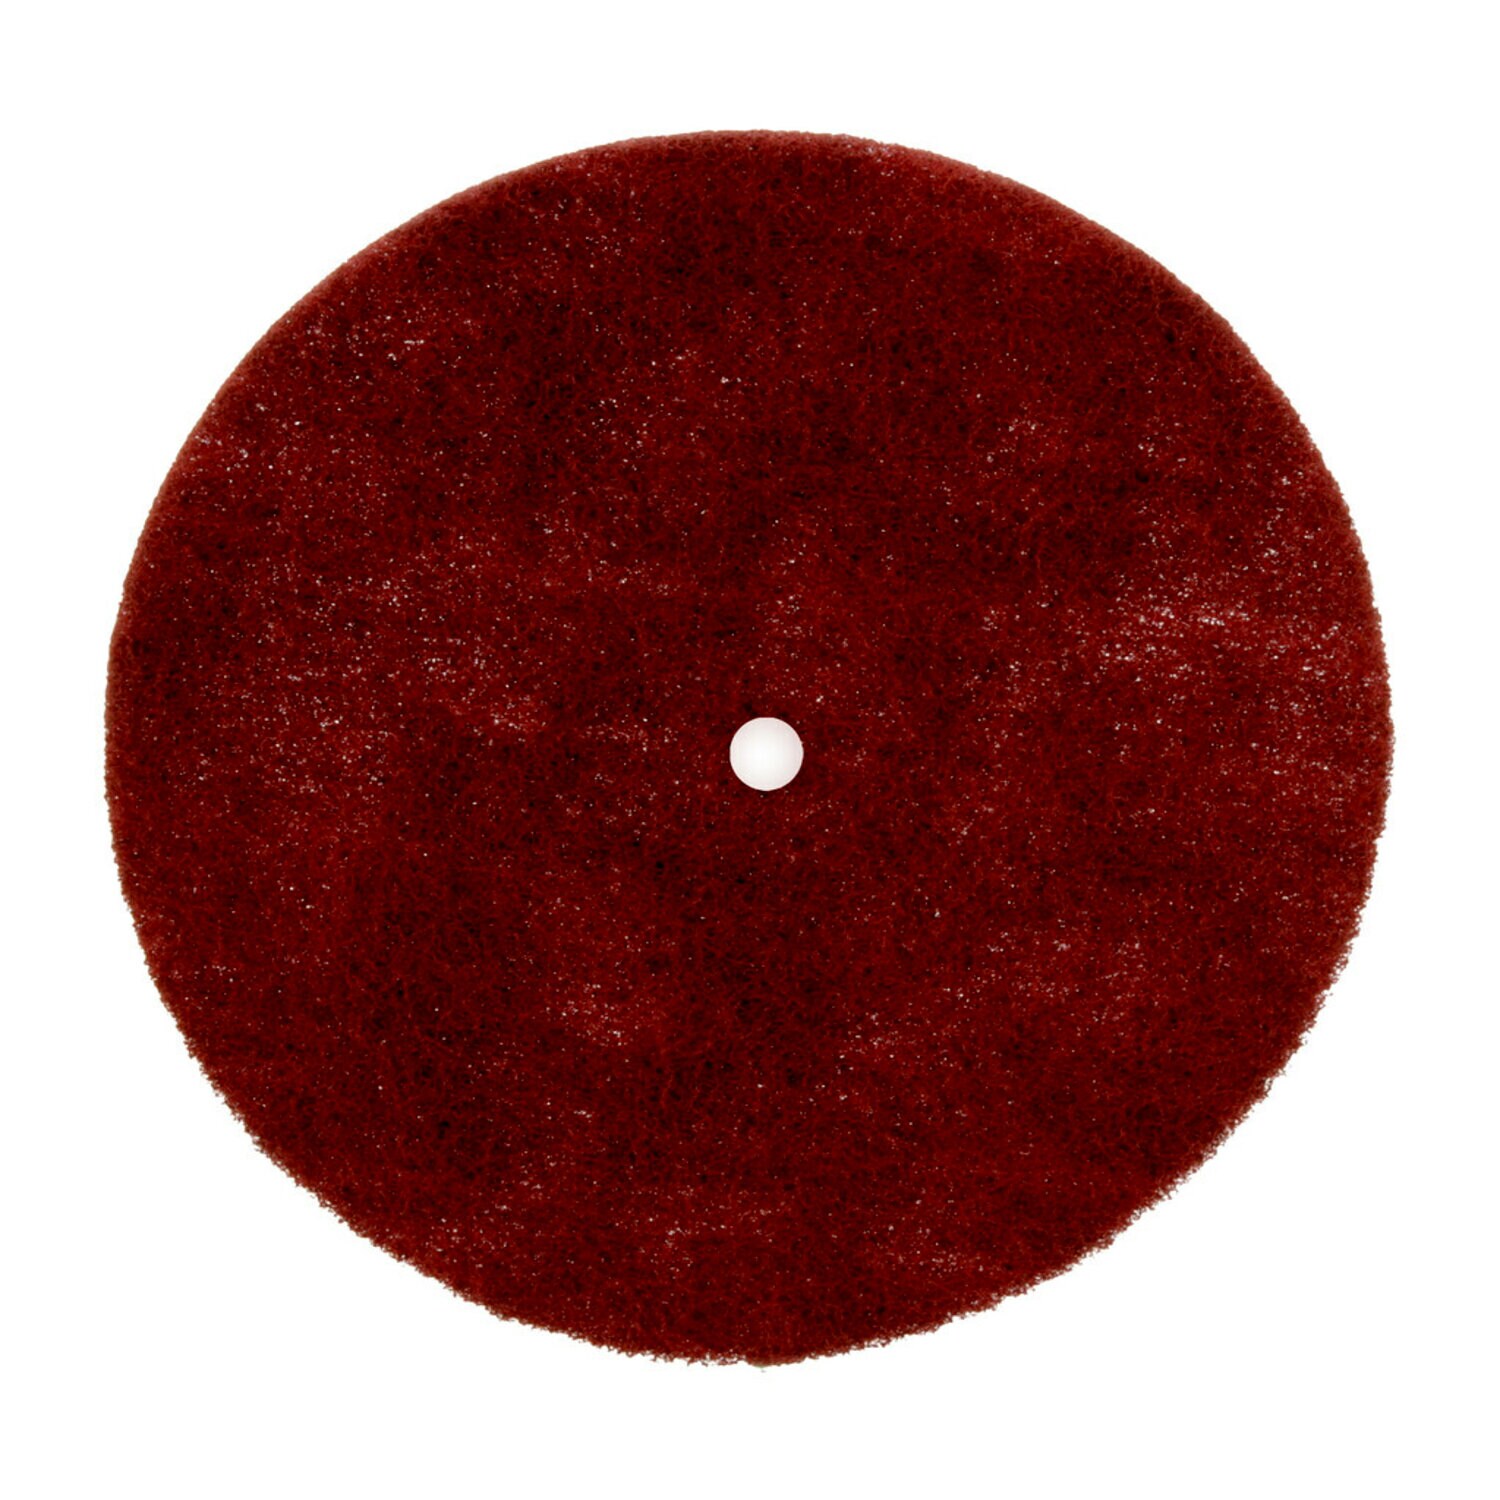 7010368543 - Standard Abrasives Buff and Blend HS Disc, 869128, 12 in x 1-1/4 in A
VFN, 5/Pac, 50 ea/Case